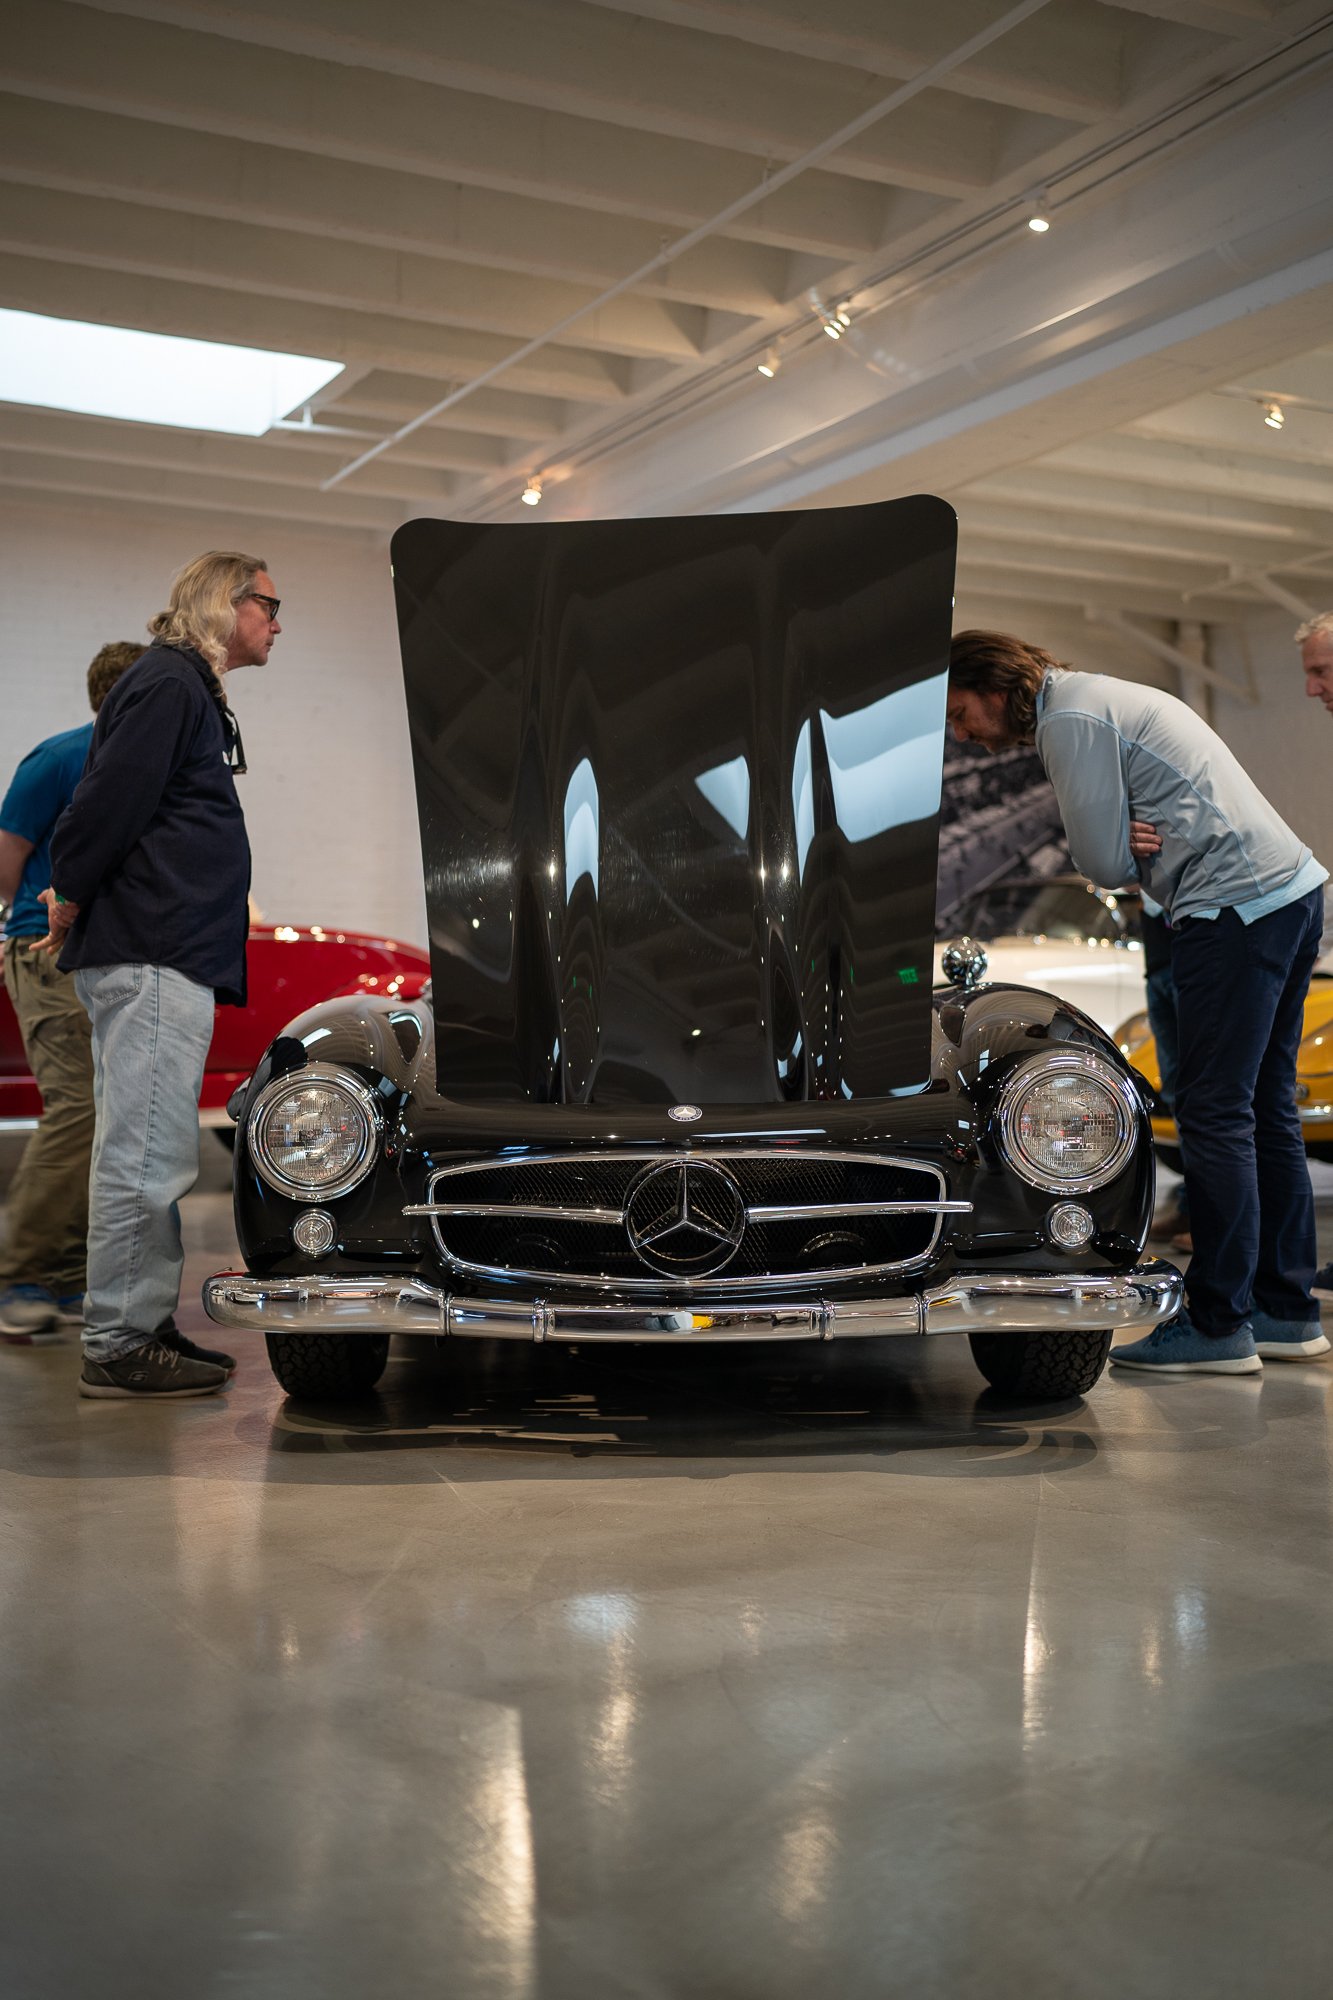 300SL Gullwing with the hood open